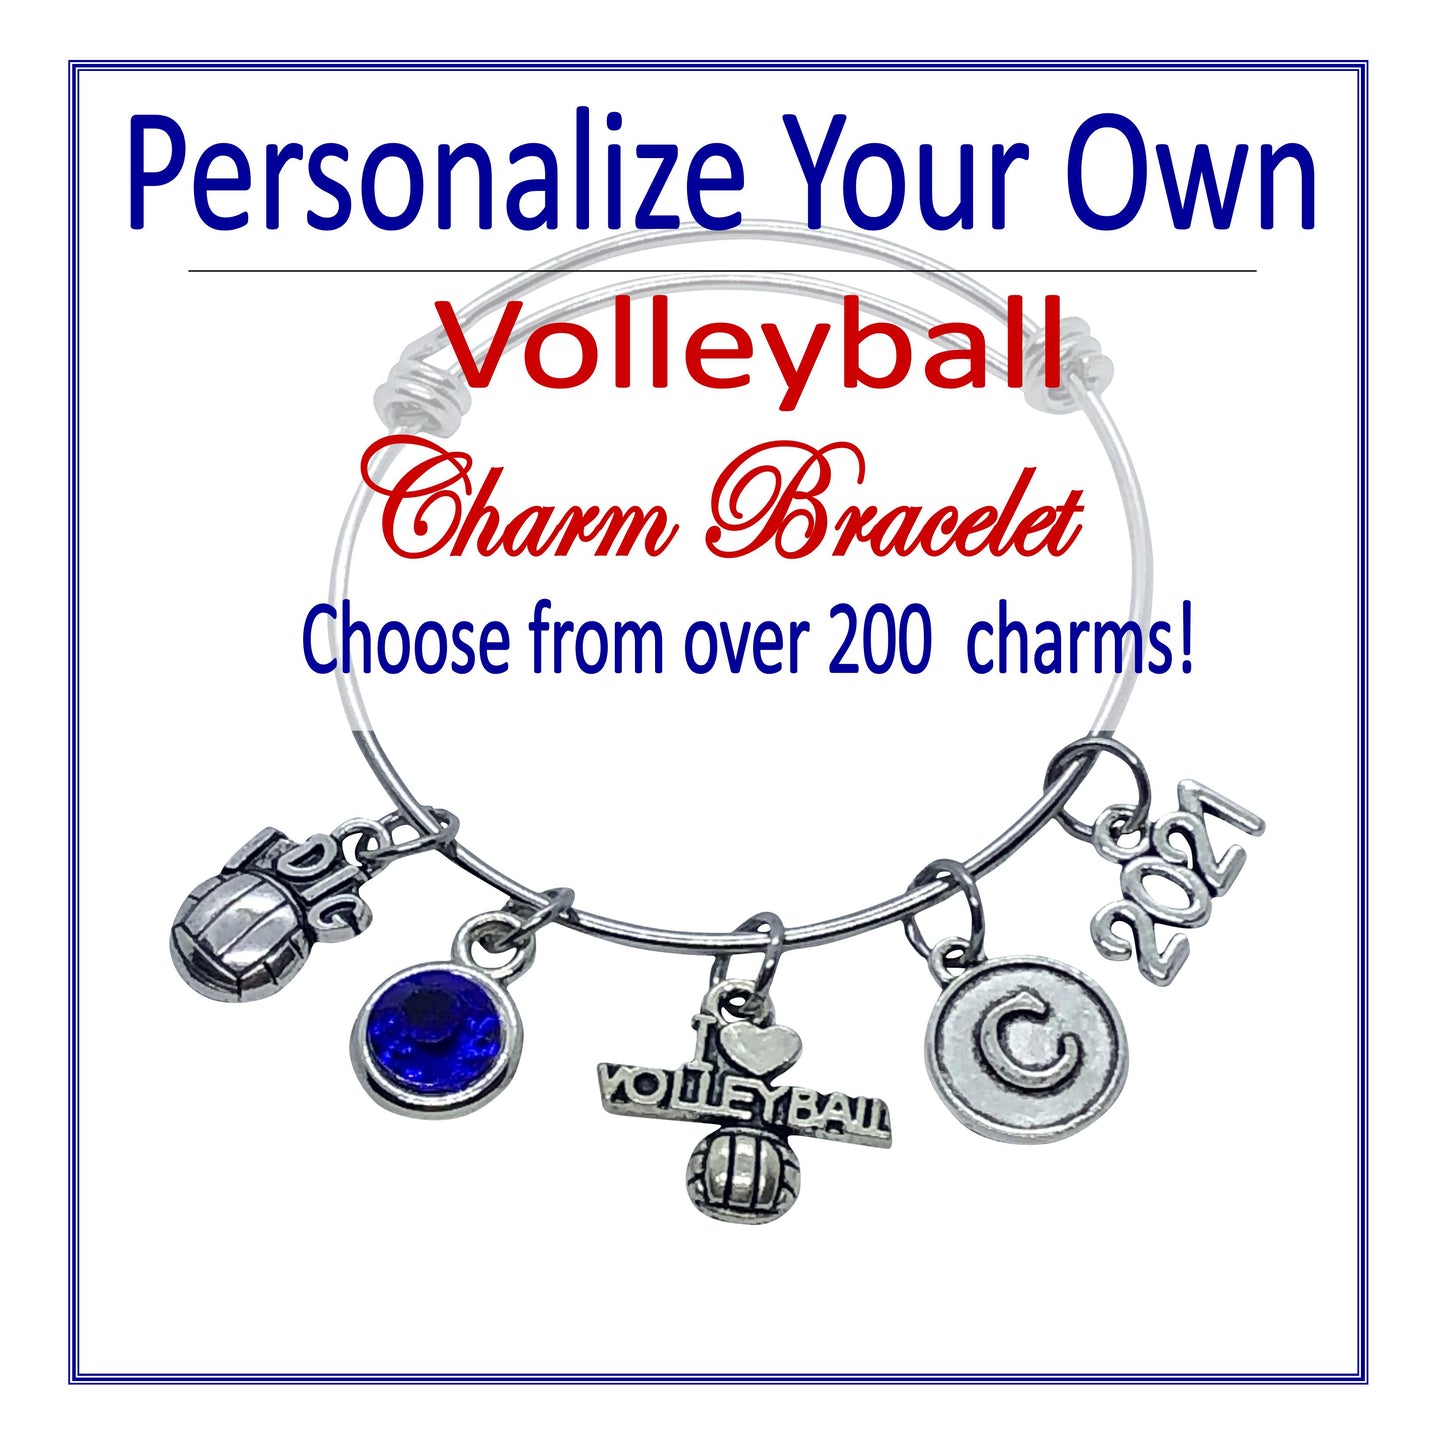 Create Your Own Volleyball Charm Bracelet - Cheer and Dance On Demand